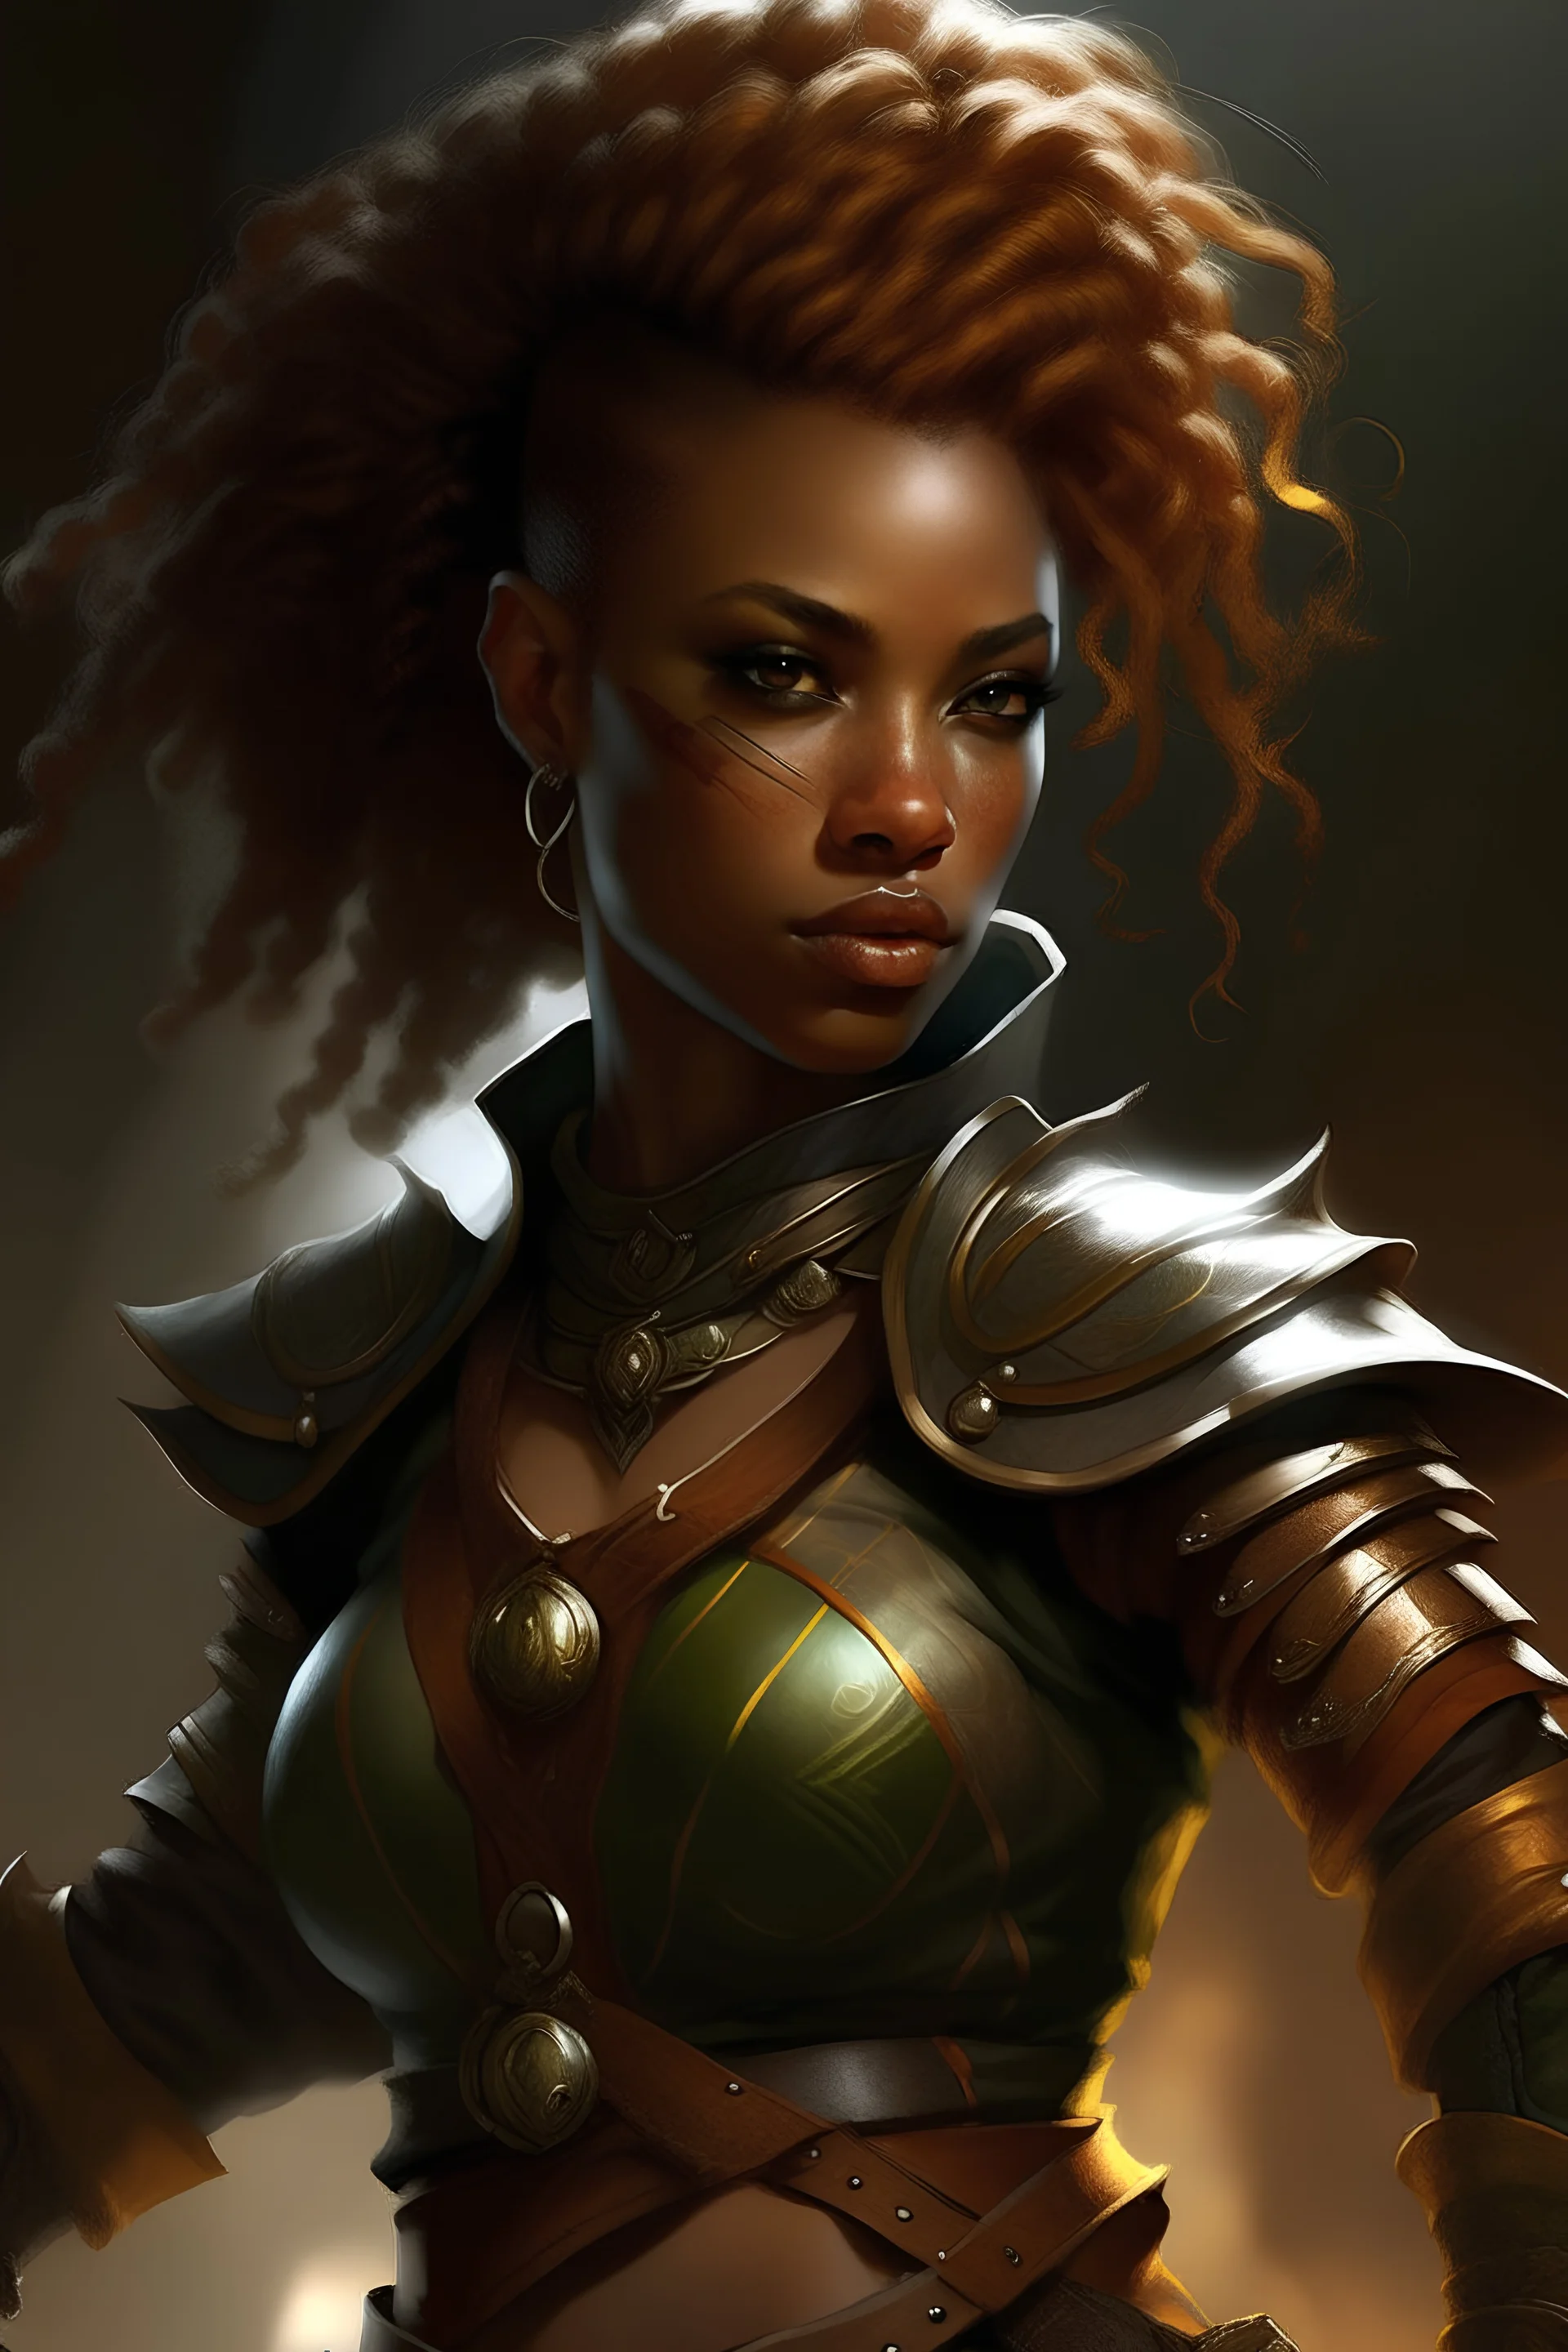 Female air genasi from dungeons and dragons, ranger, wind like hair, wearing hot leather clothing that also looks studded, woman of color, realistic, digital art, high resolution, strong lighting